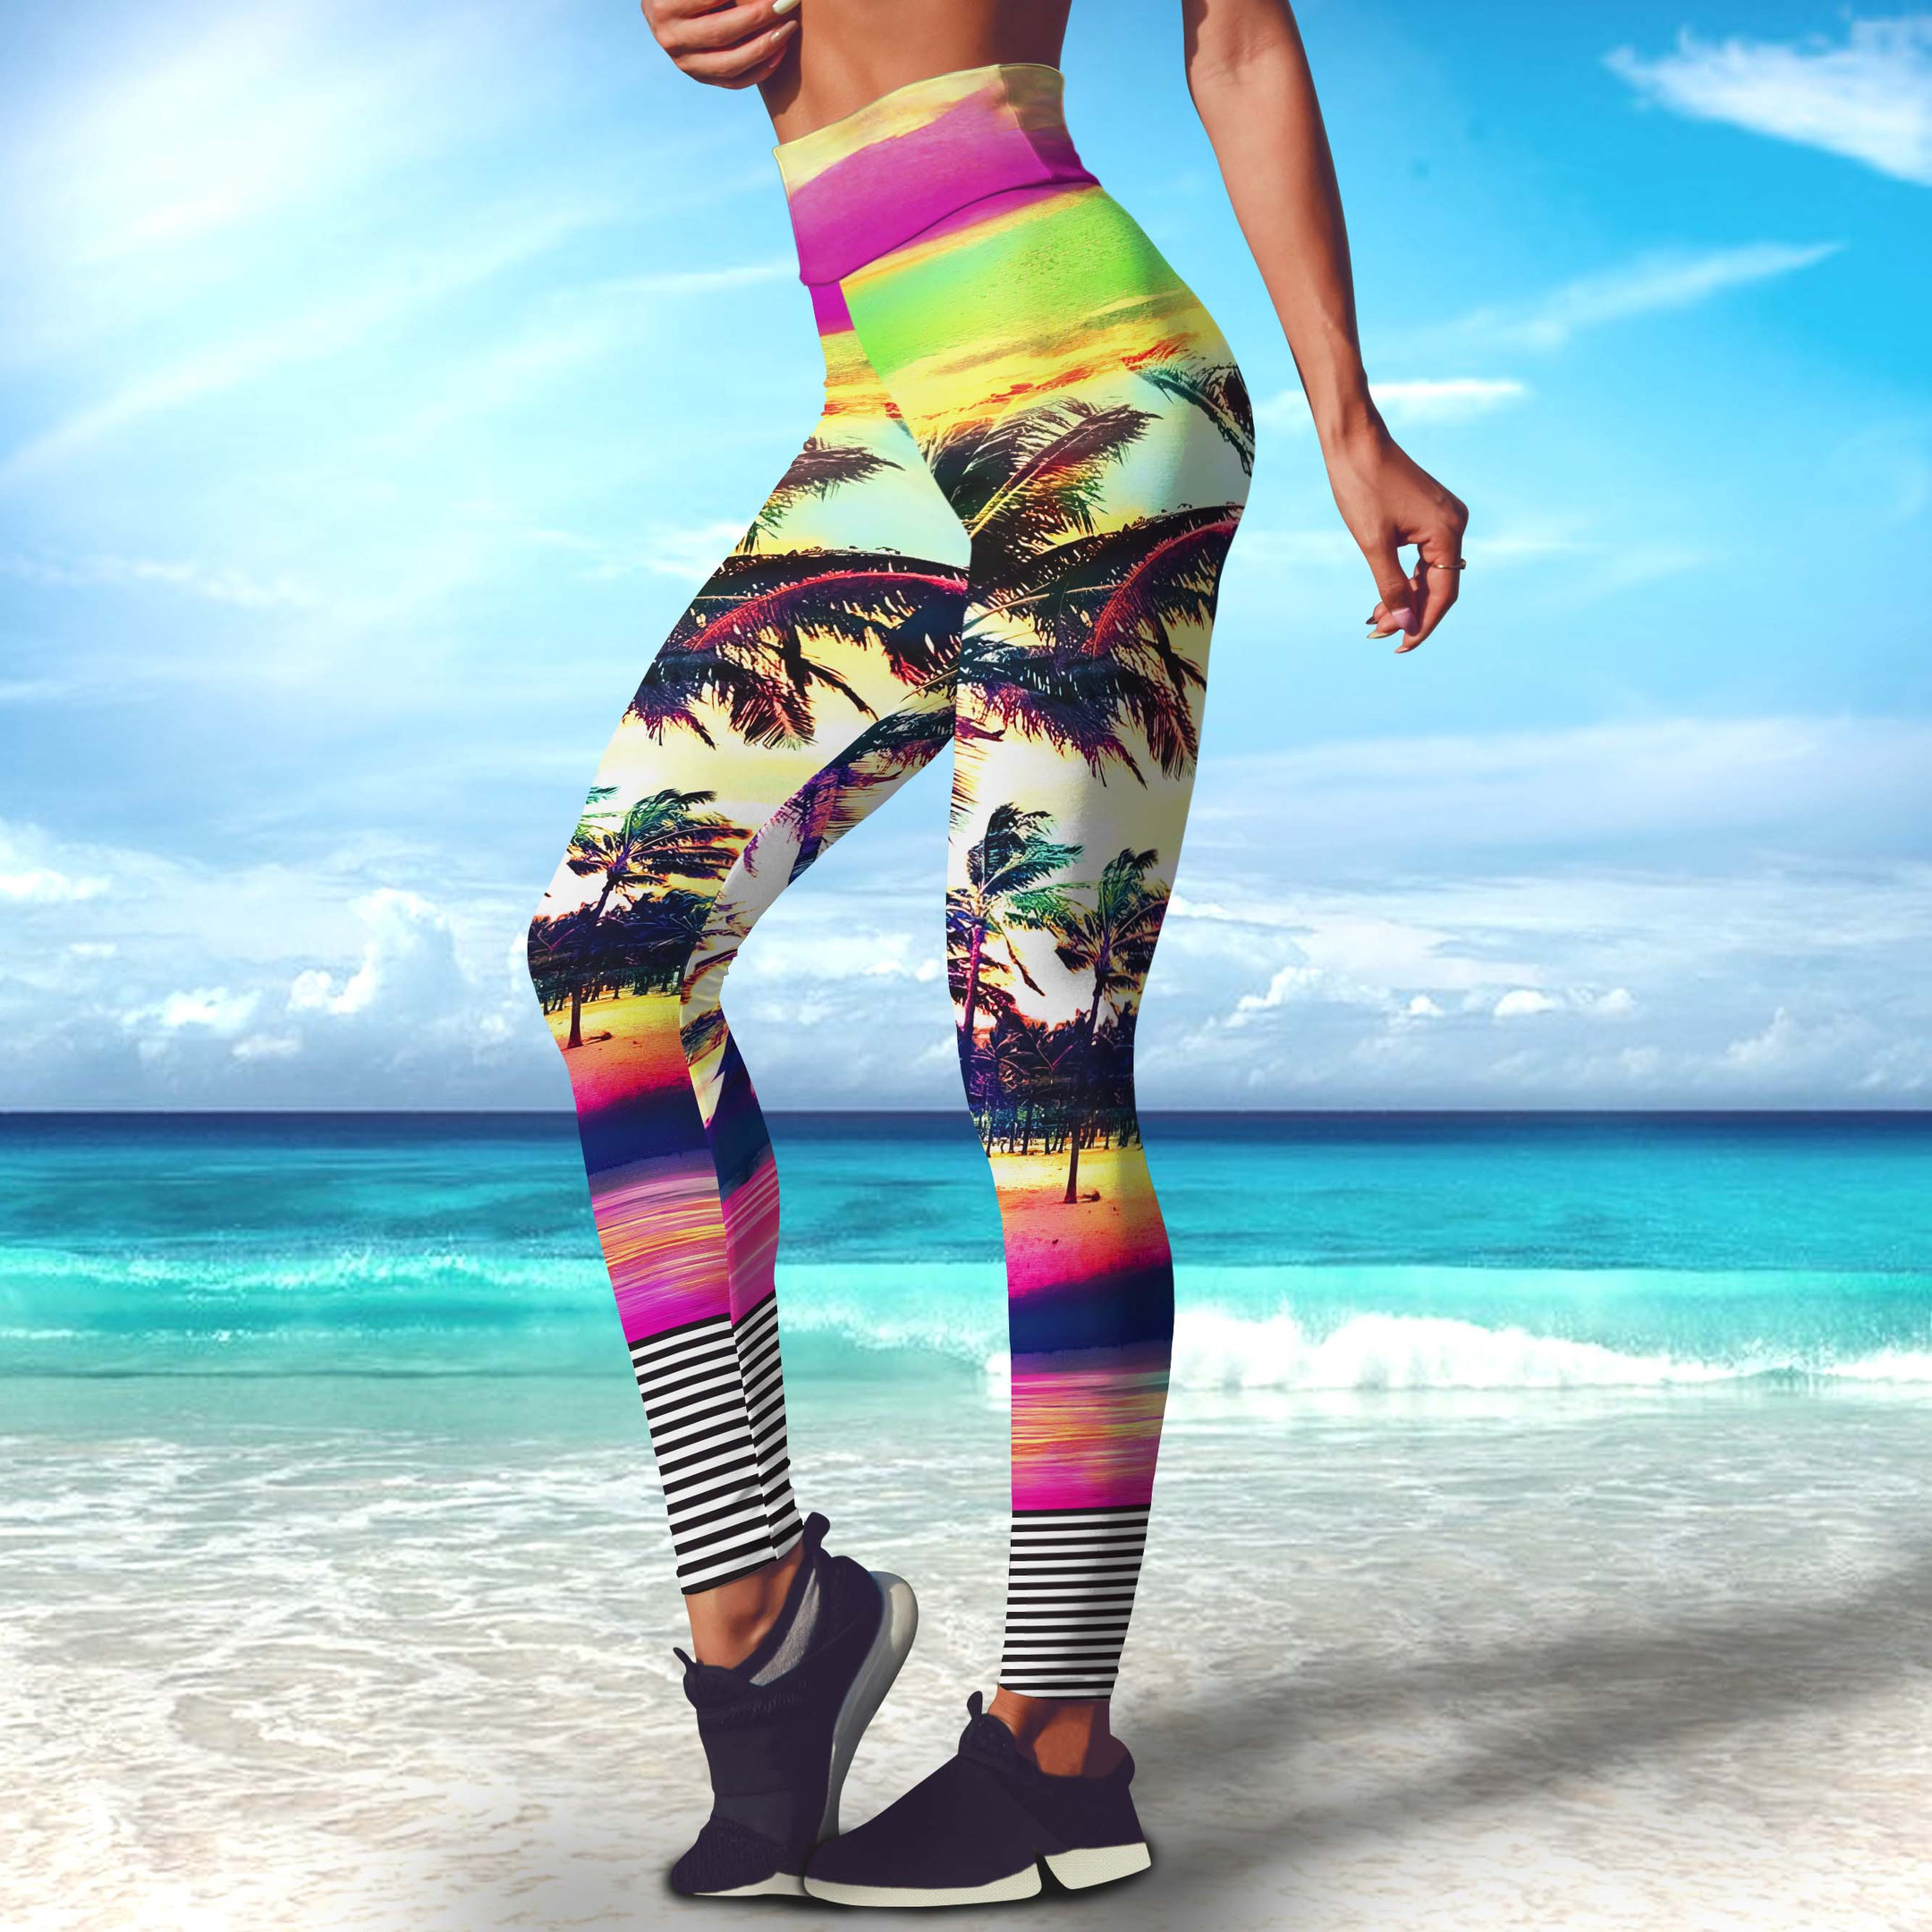 Tropical Coconut Tree Beach Surf Leggings Sunset Scenery High Wasted Surfing Workout Gym Pants Gift For Mom Wife